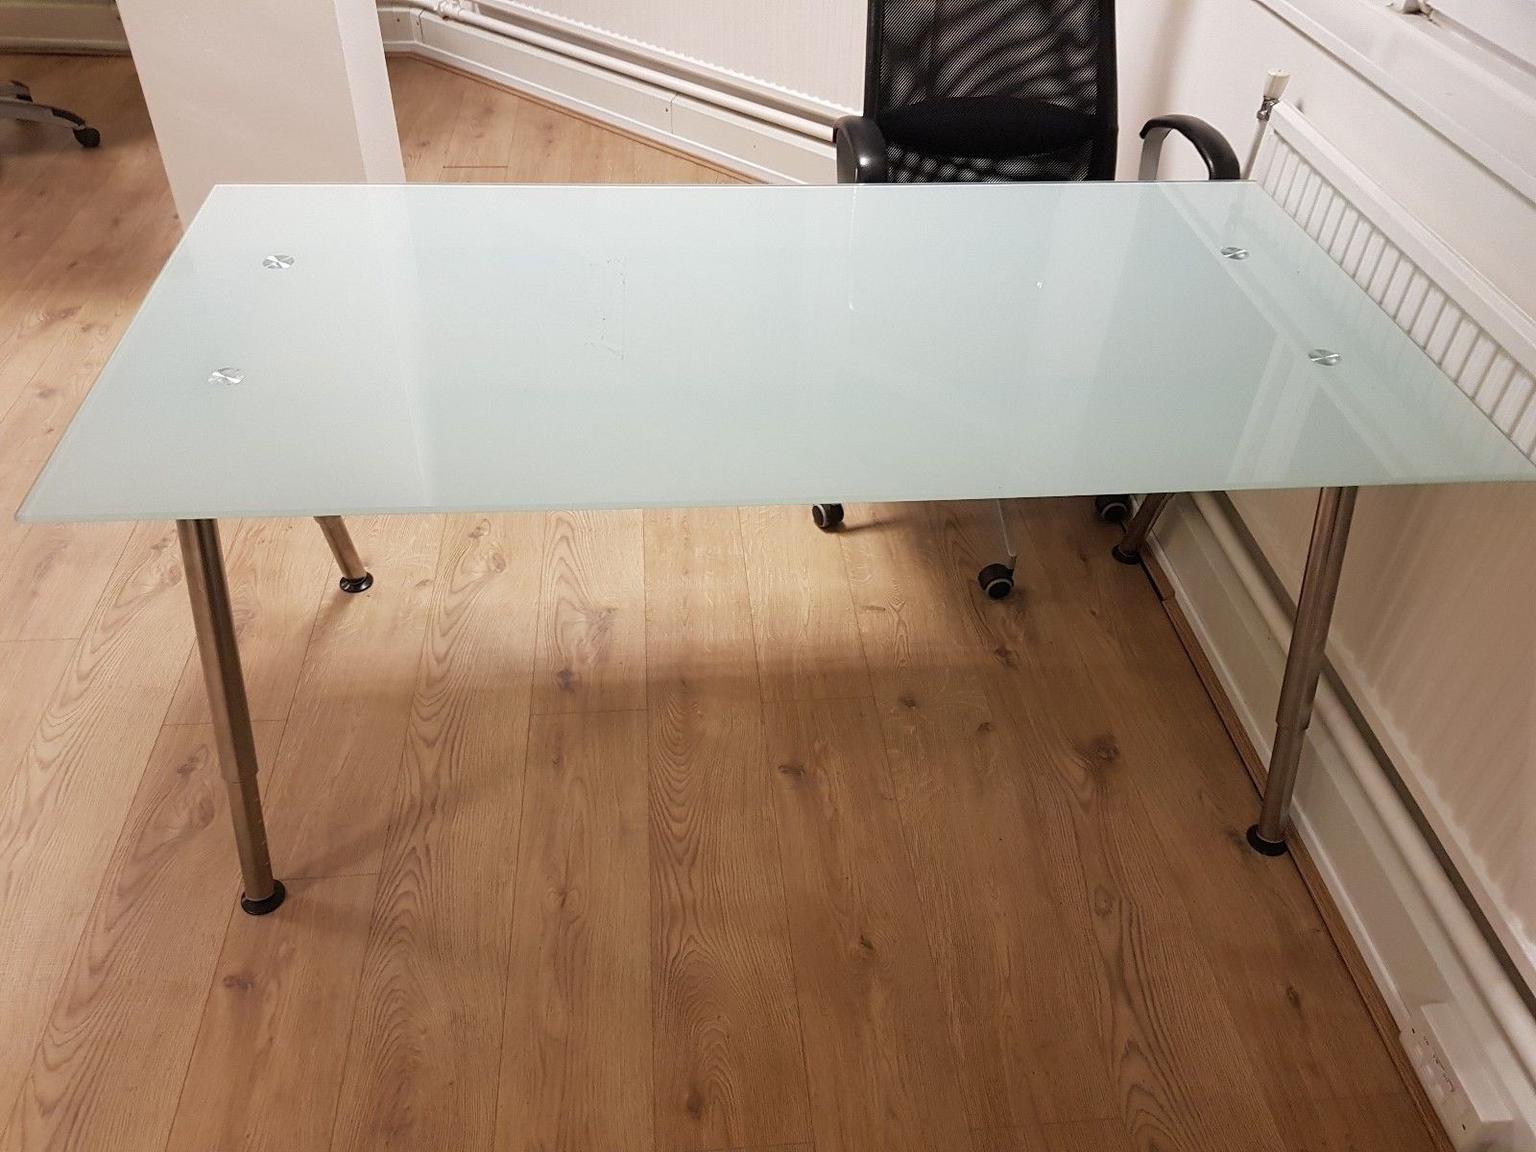 Ikea Galant Desk In Bn41 Adur For 70 00 For Sale Shpock